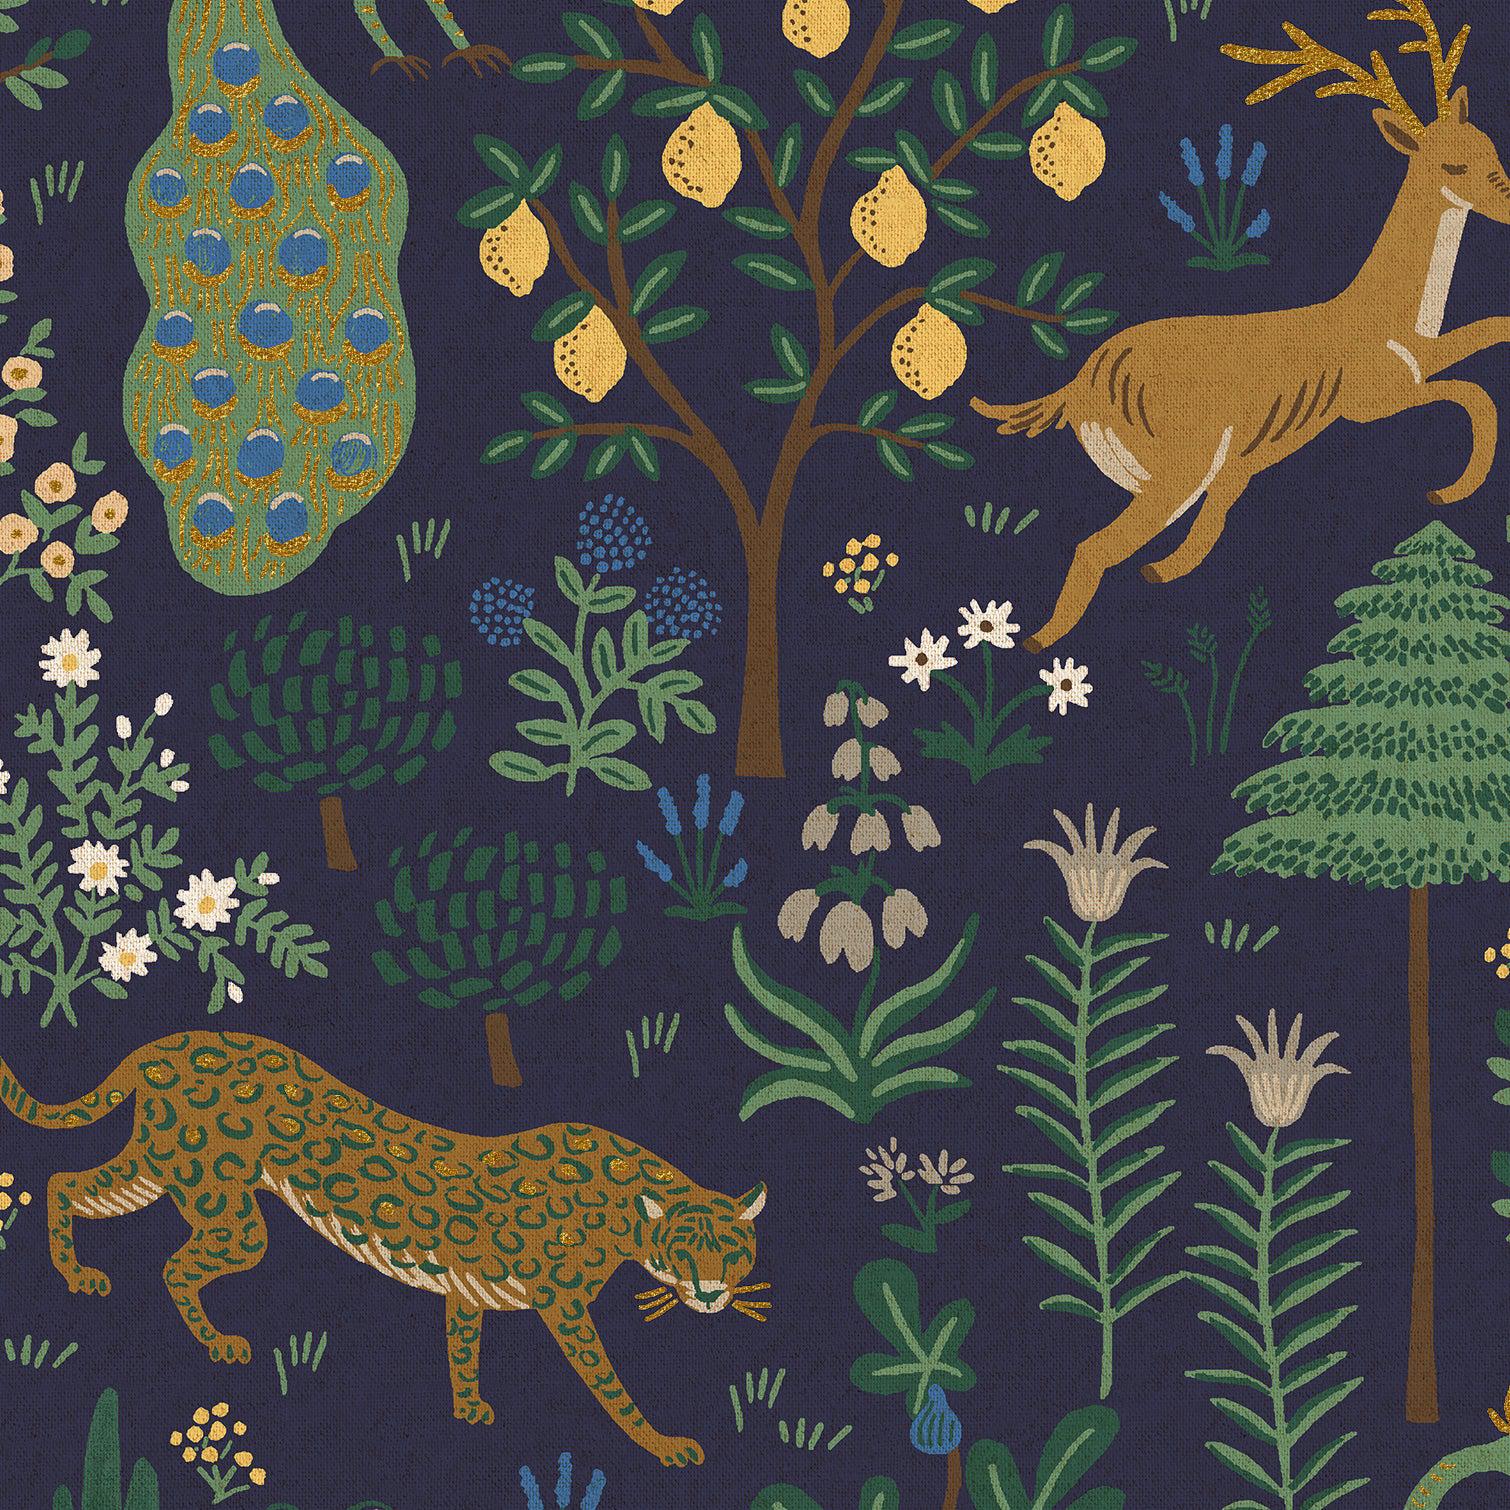 Cotton + Steel-Menagerie Navy Metallic on Canvas-fabric-gather here online